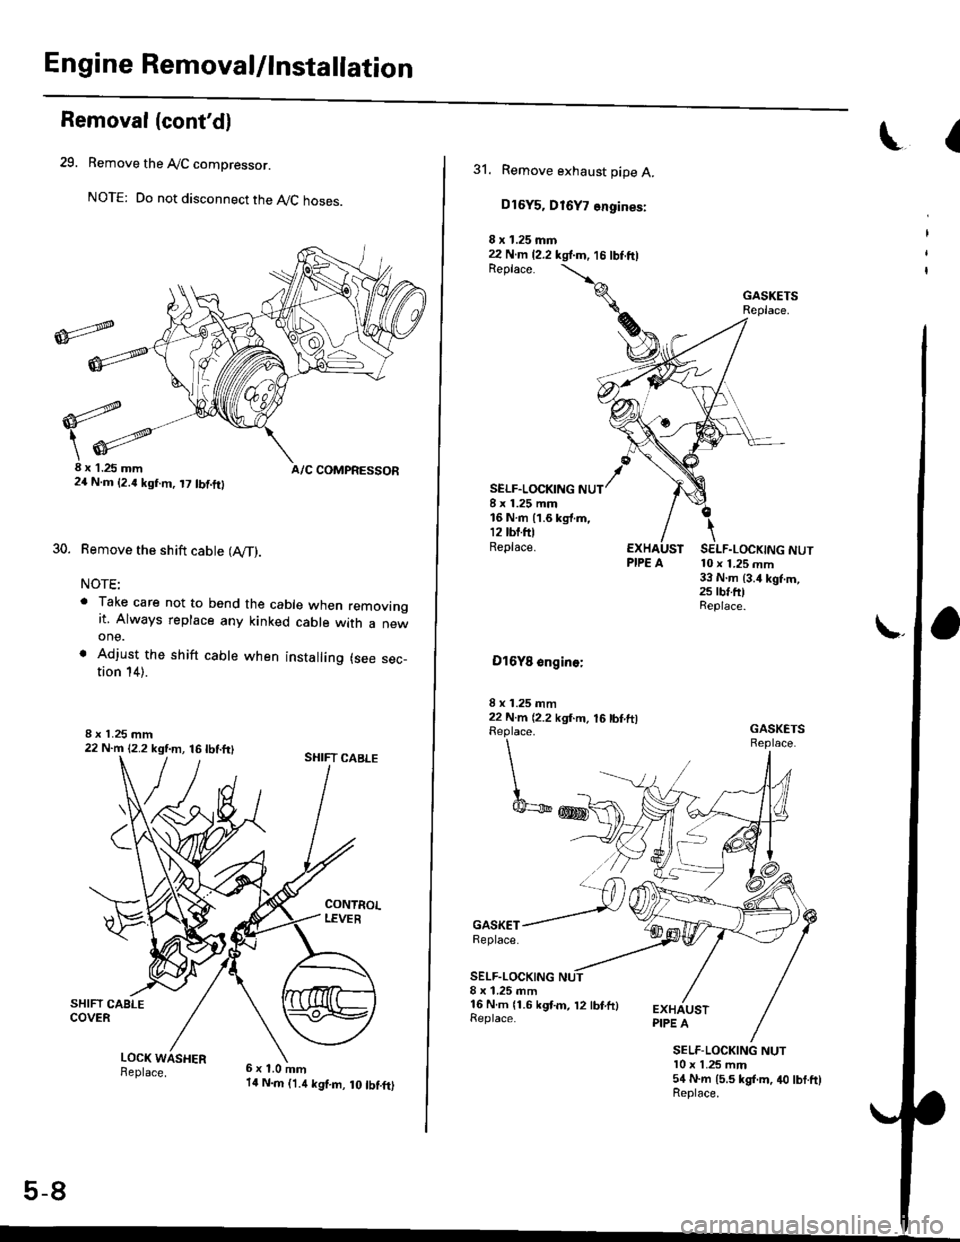 HONDA CIVIC 1997 6.G Repair Manual Engine Removal/lnstallation
Removal(contdl
29. Remove the AyC compressor.
NOTE: Do not disconnect the AyC hoses.
30.
8x 1.25 mm A/C COMPRESSOR24 N.m (2.{ kgf.m, t7 tbtft}
Remove the shift cable (IV